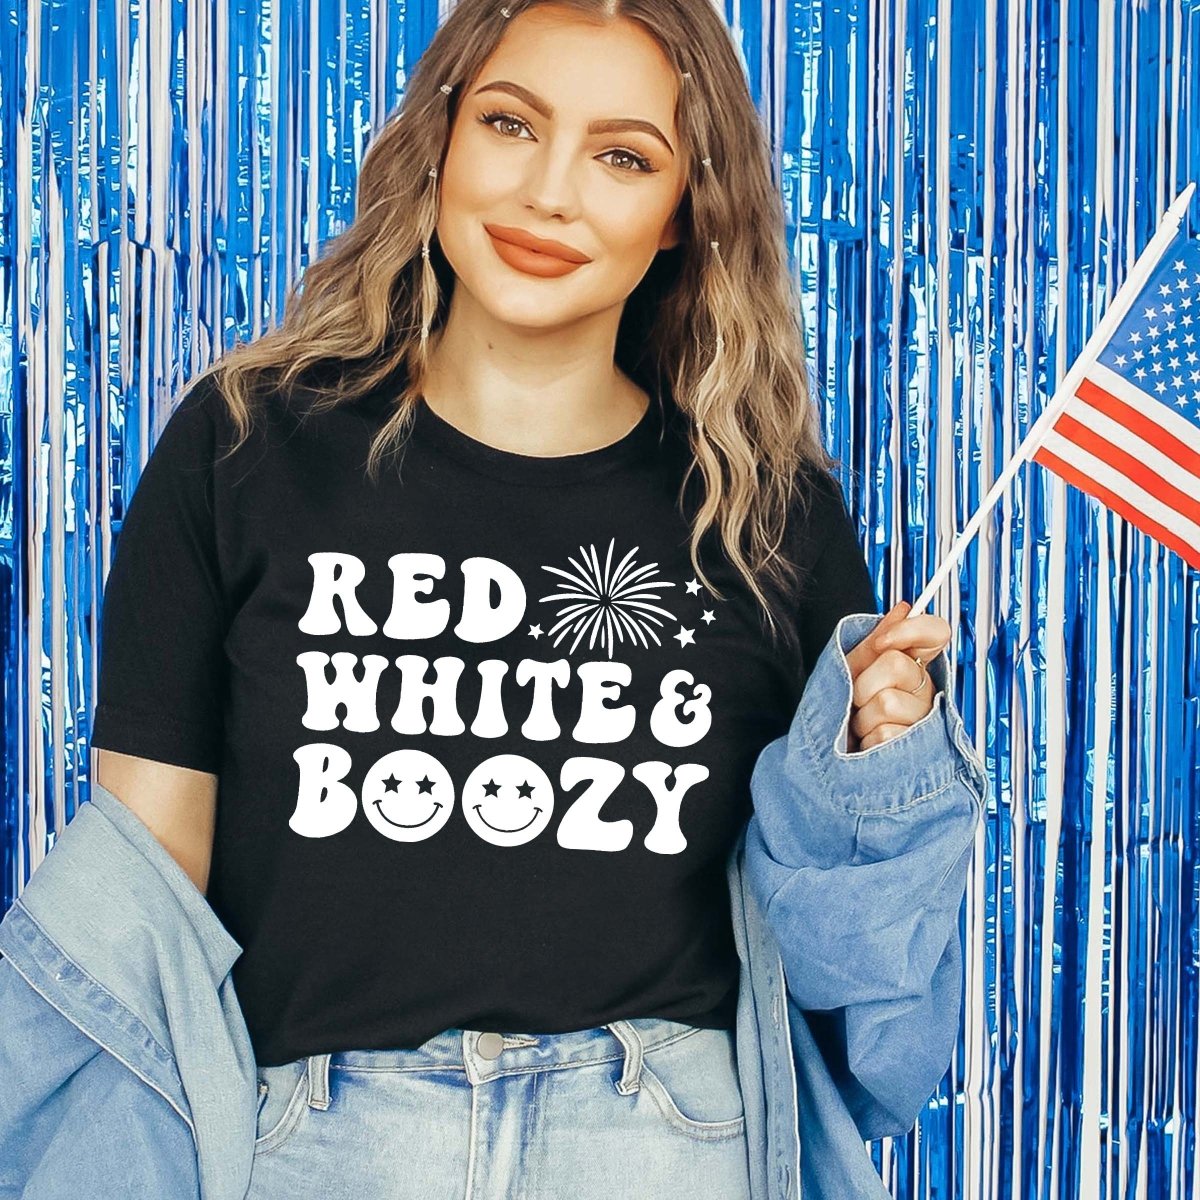 Red white and Boozy Tee - Limeberry Designs